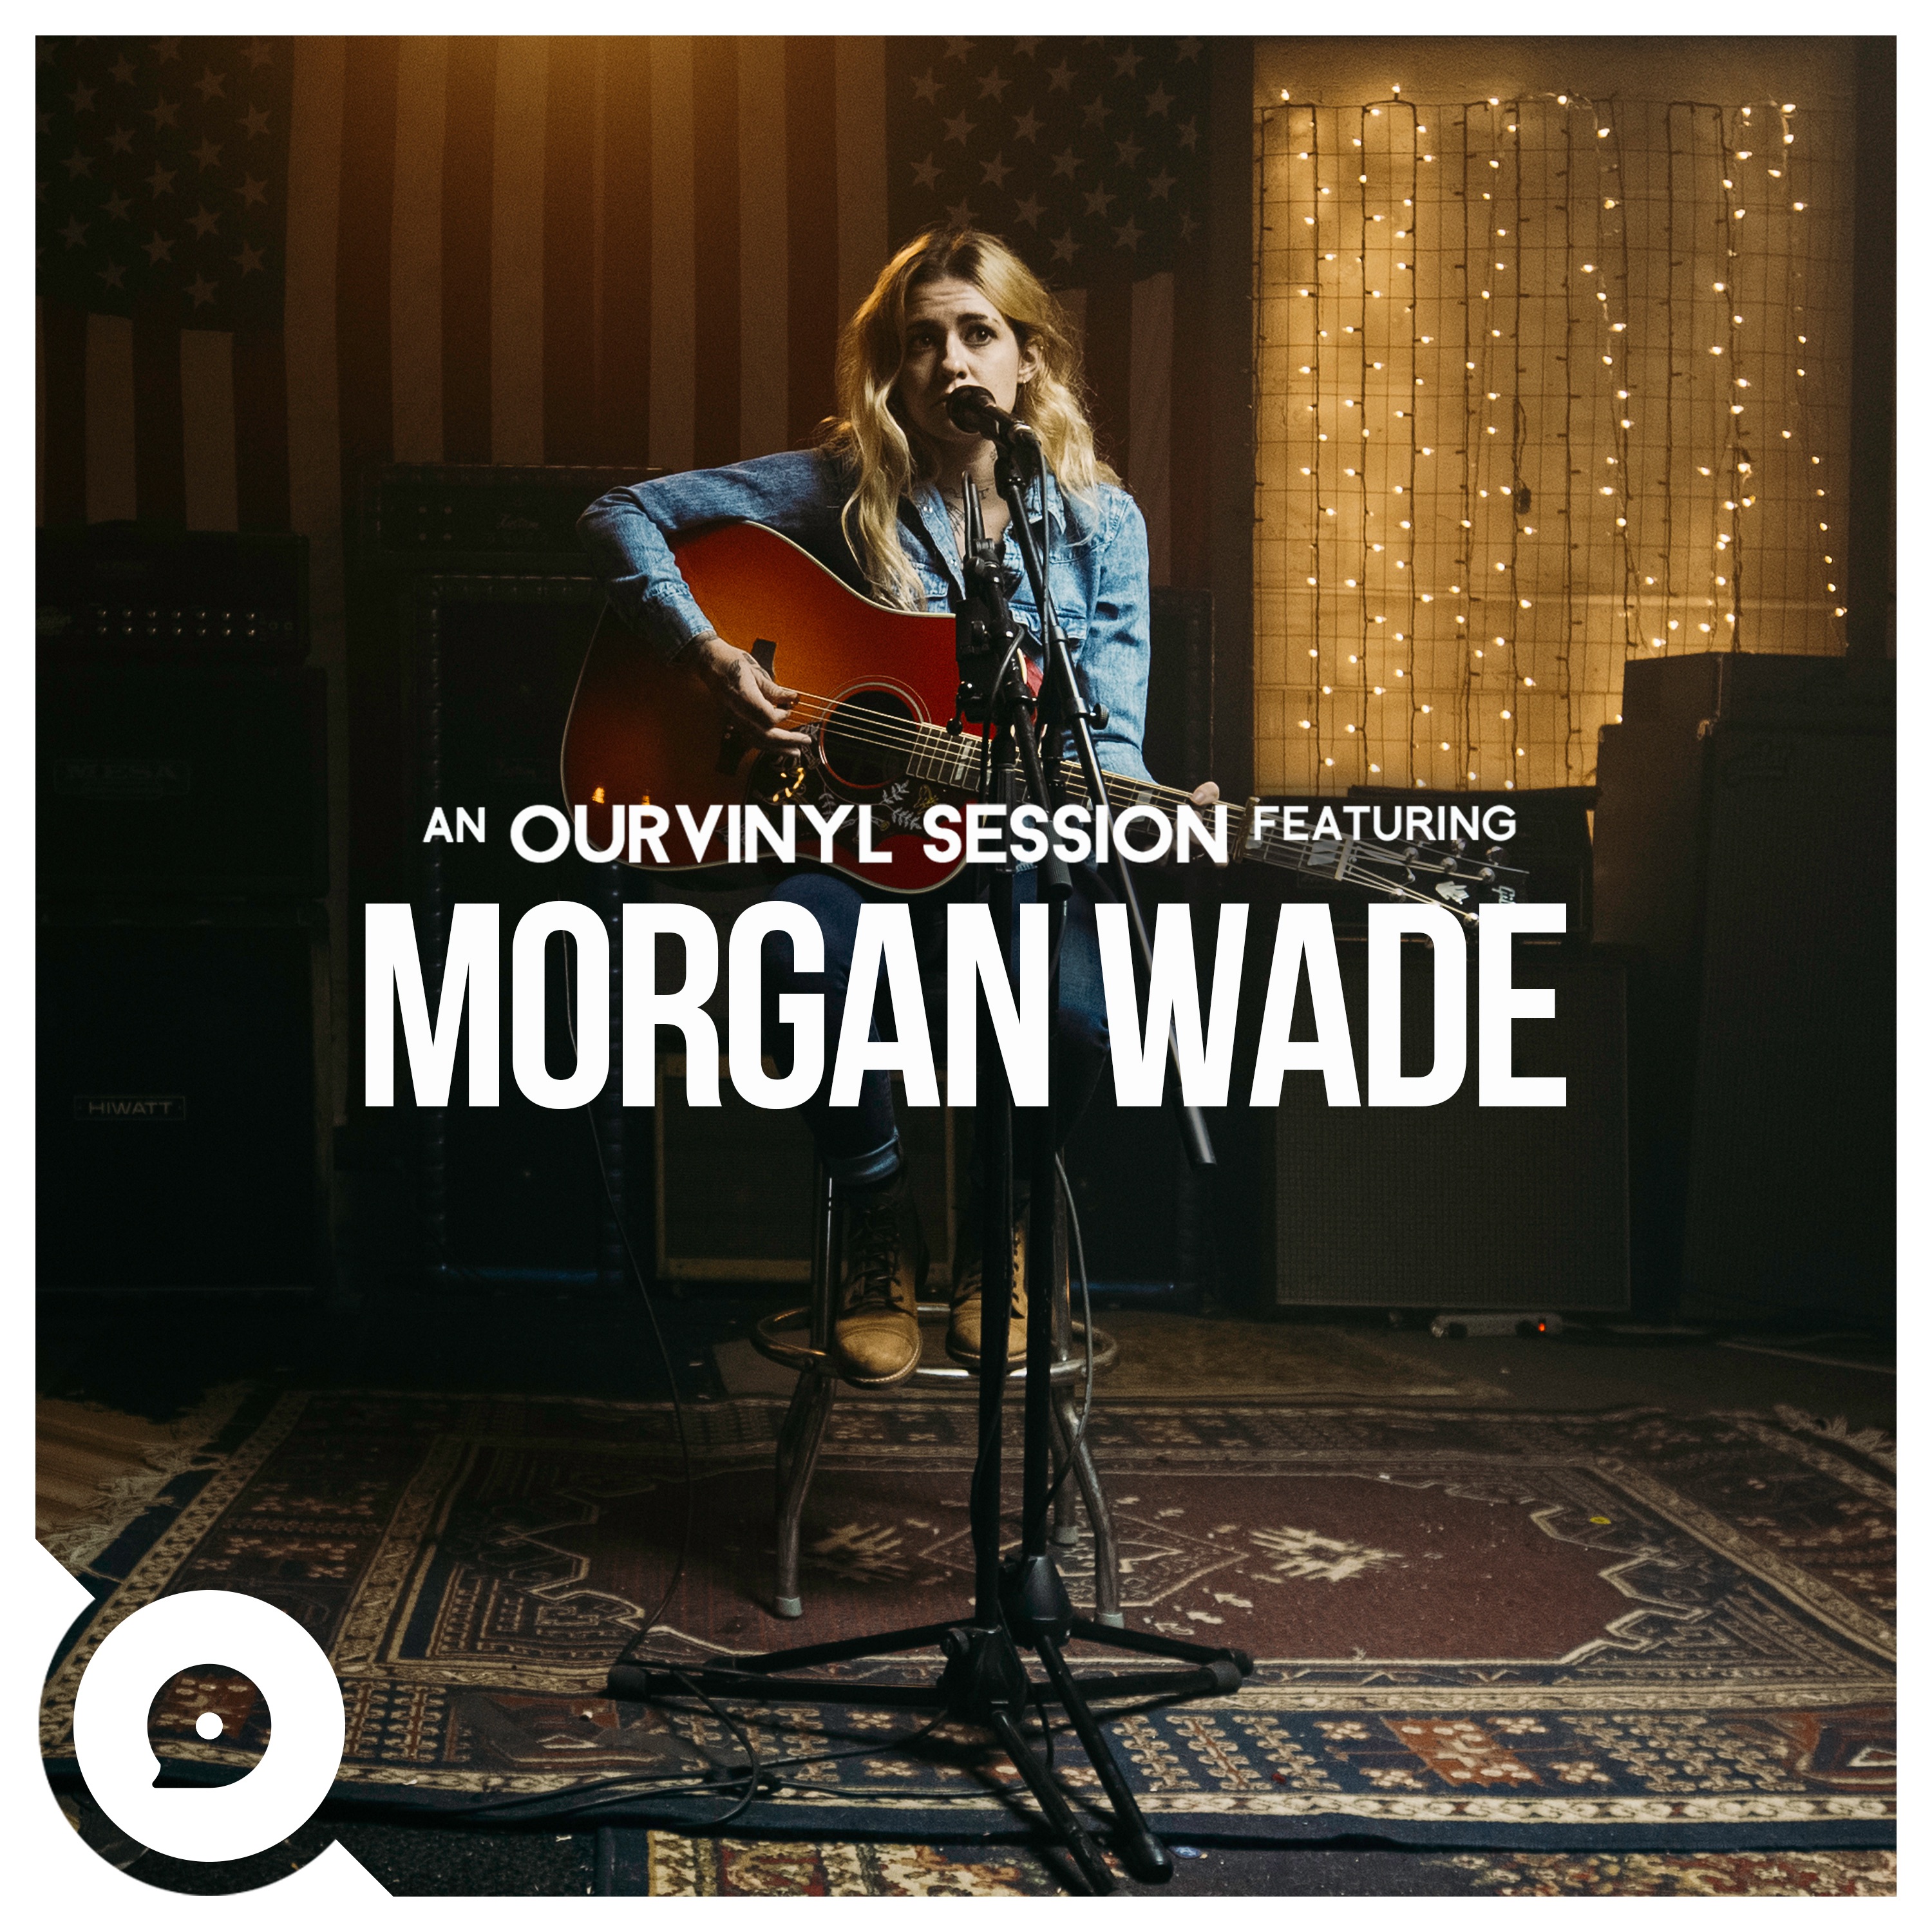 OurVinyl cover art of Morgan Wade's
session